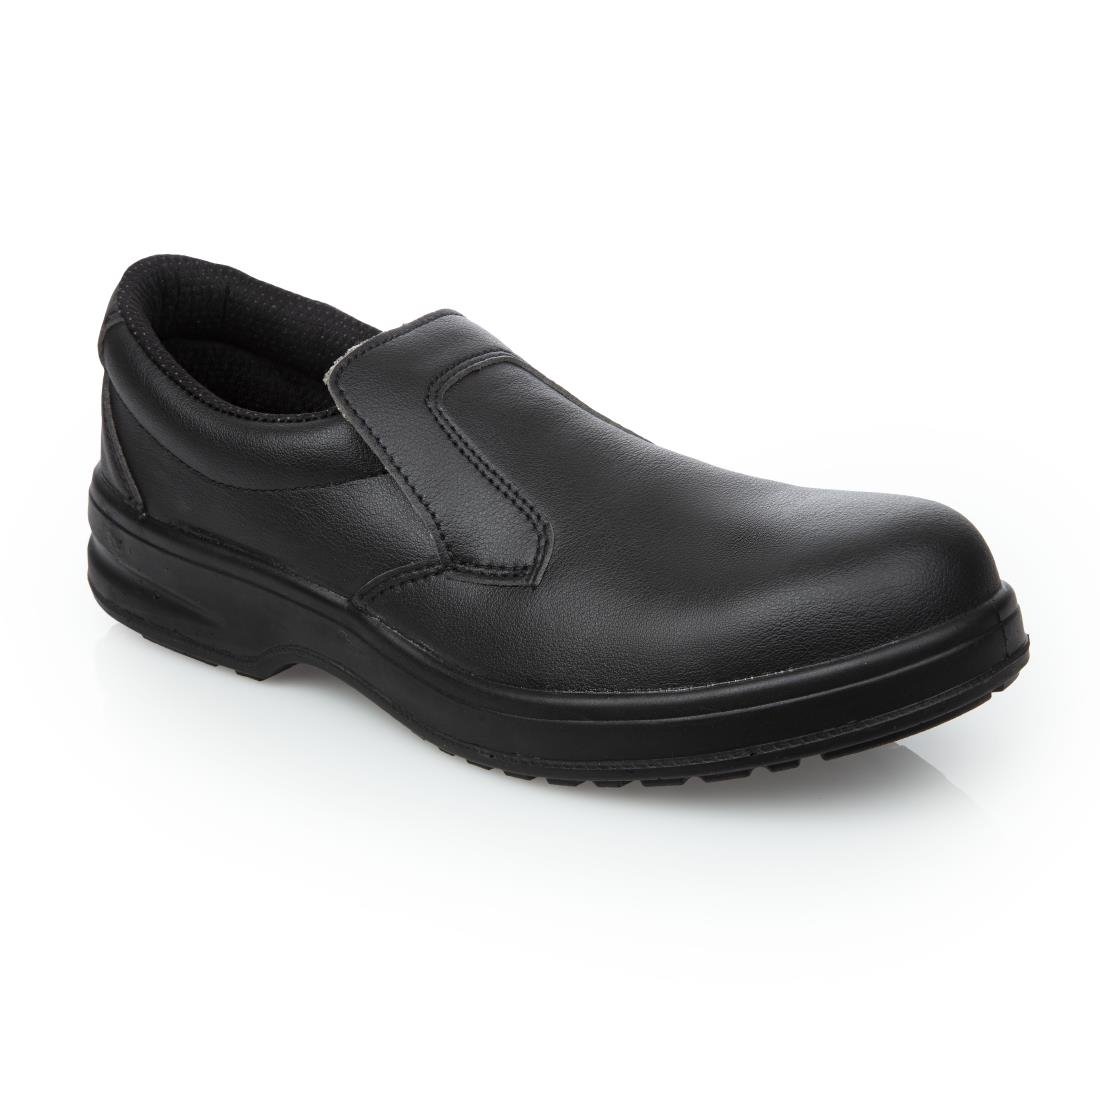 A845-46 Slipbuster Lite Slip On Safety Shoes Black 46 JD Catering Equipment Solutions Ltd